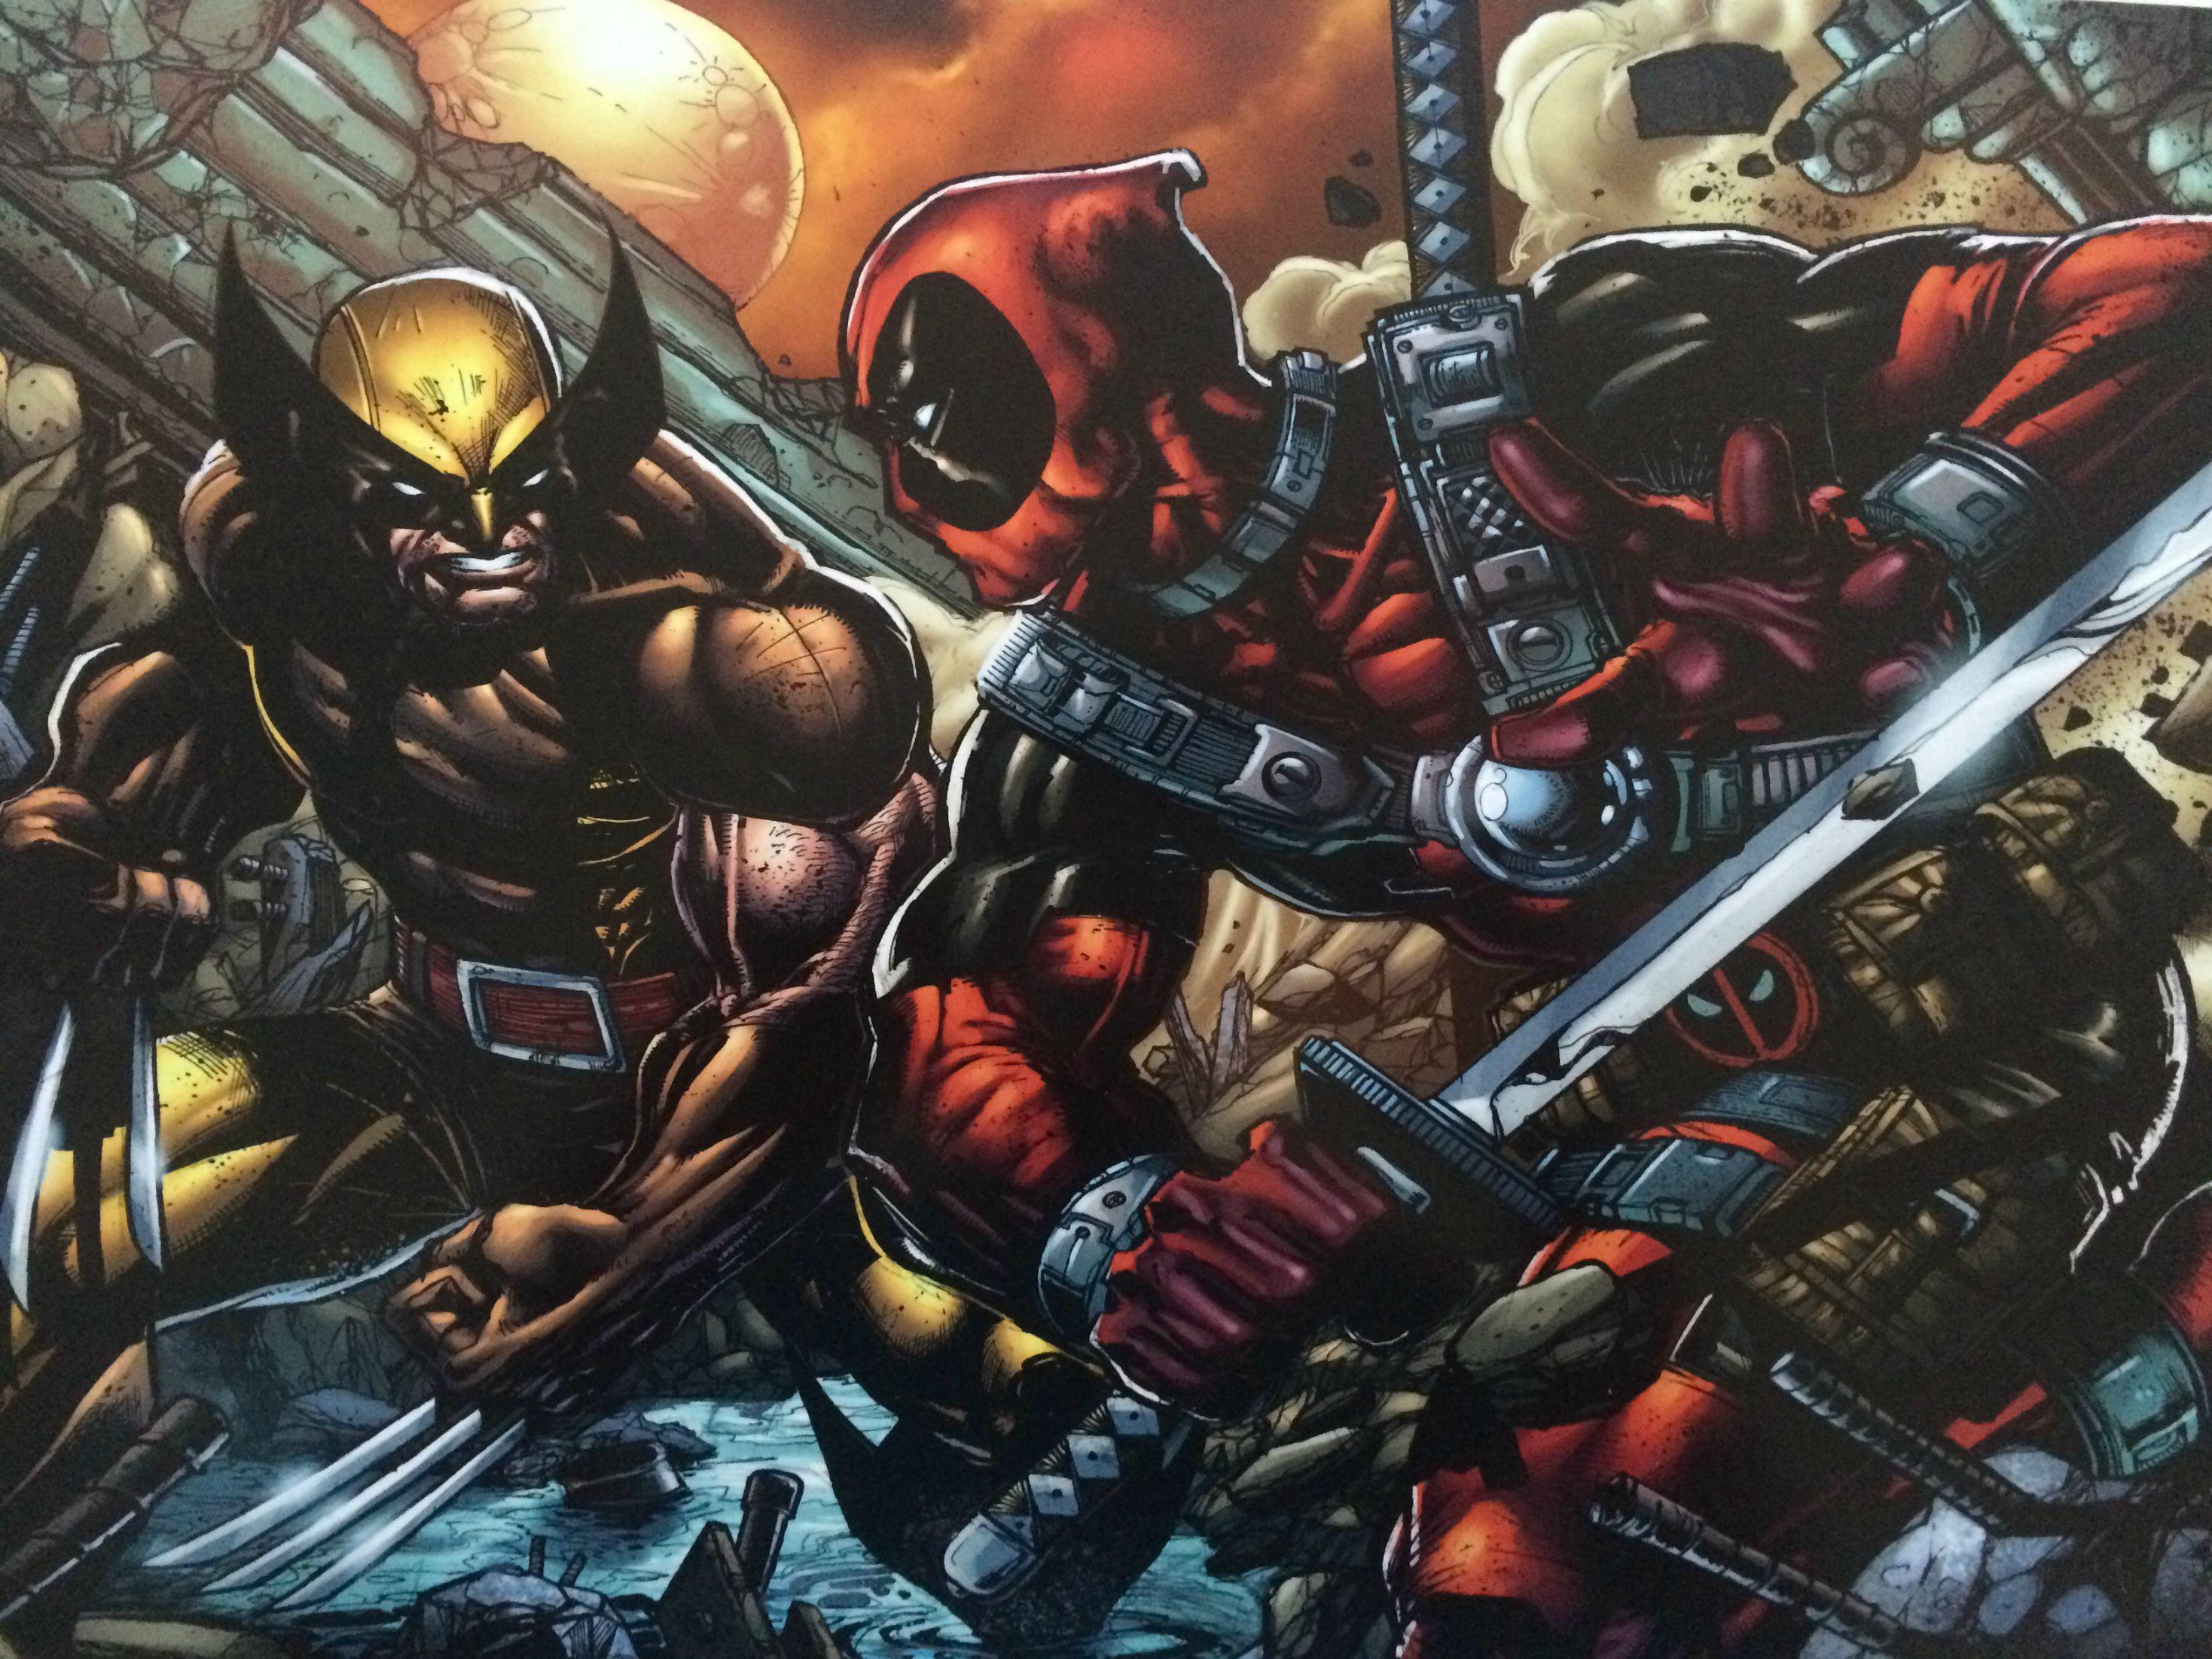 Deadpool vs Wolverine print I purchased at NC Comicon